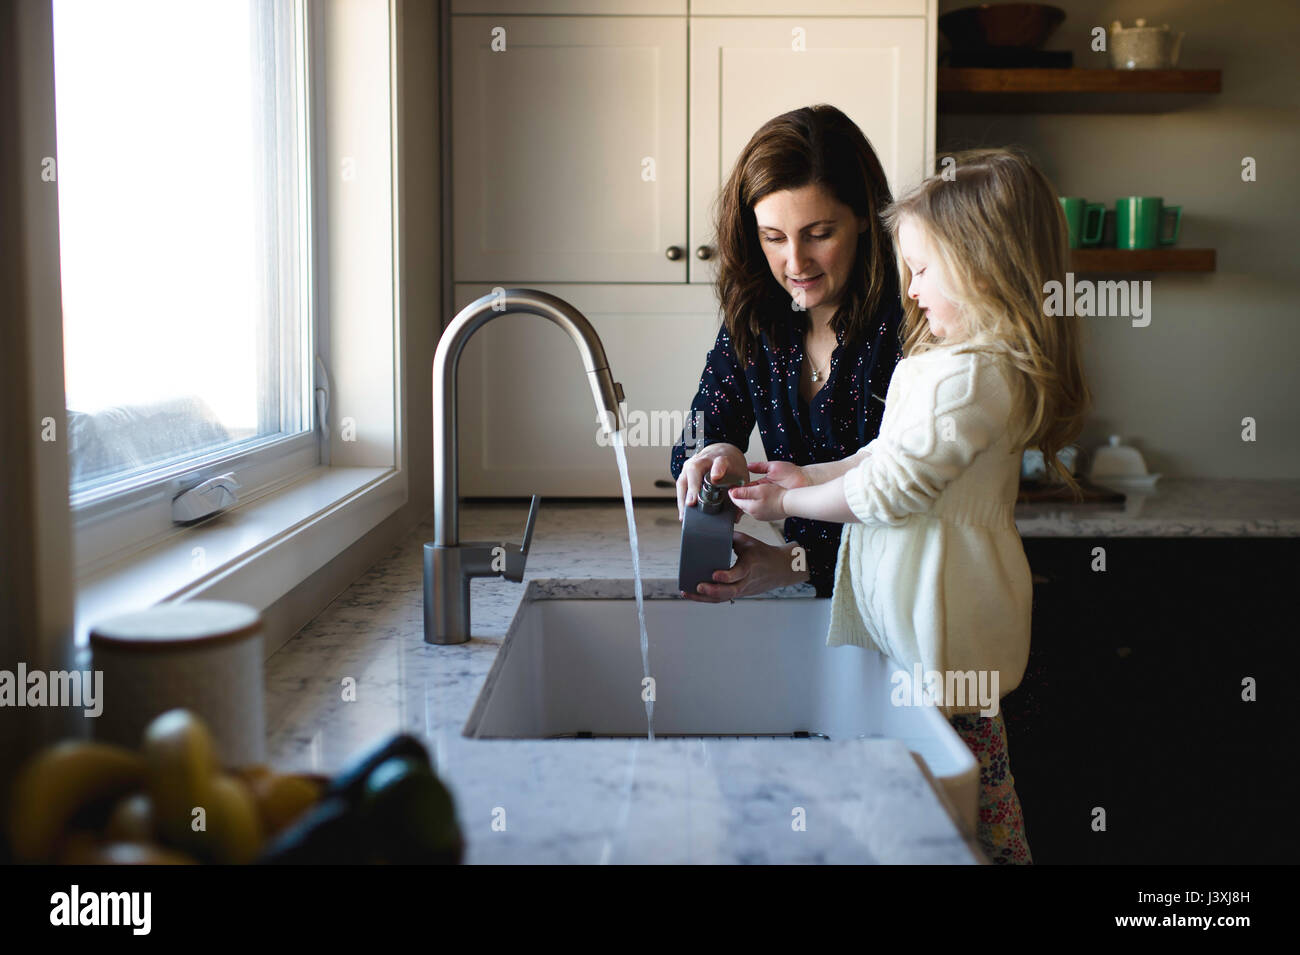 Woman helping daughter wash hands at kitchen sink Stock Photo